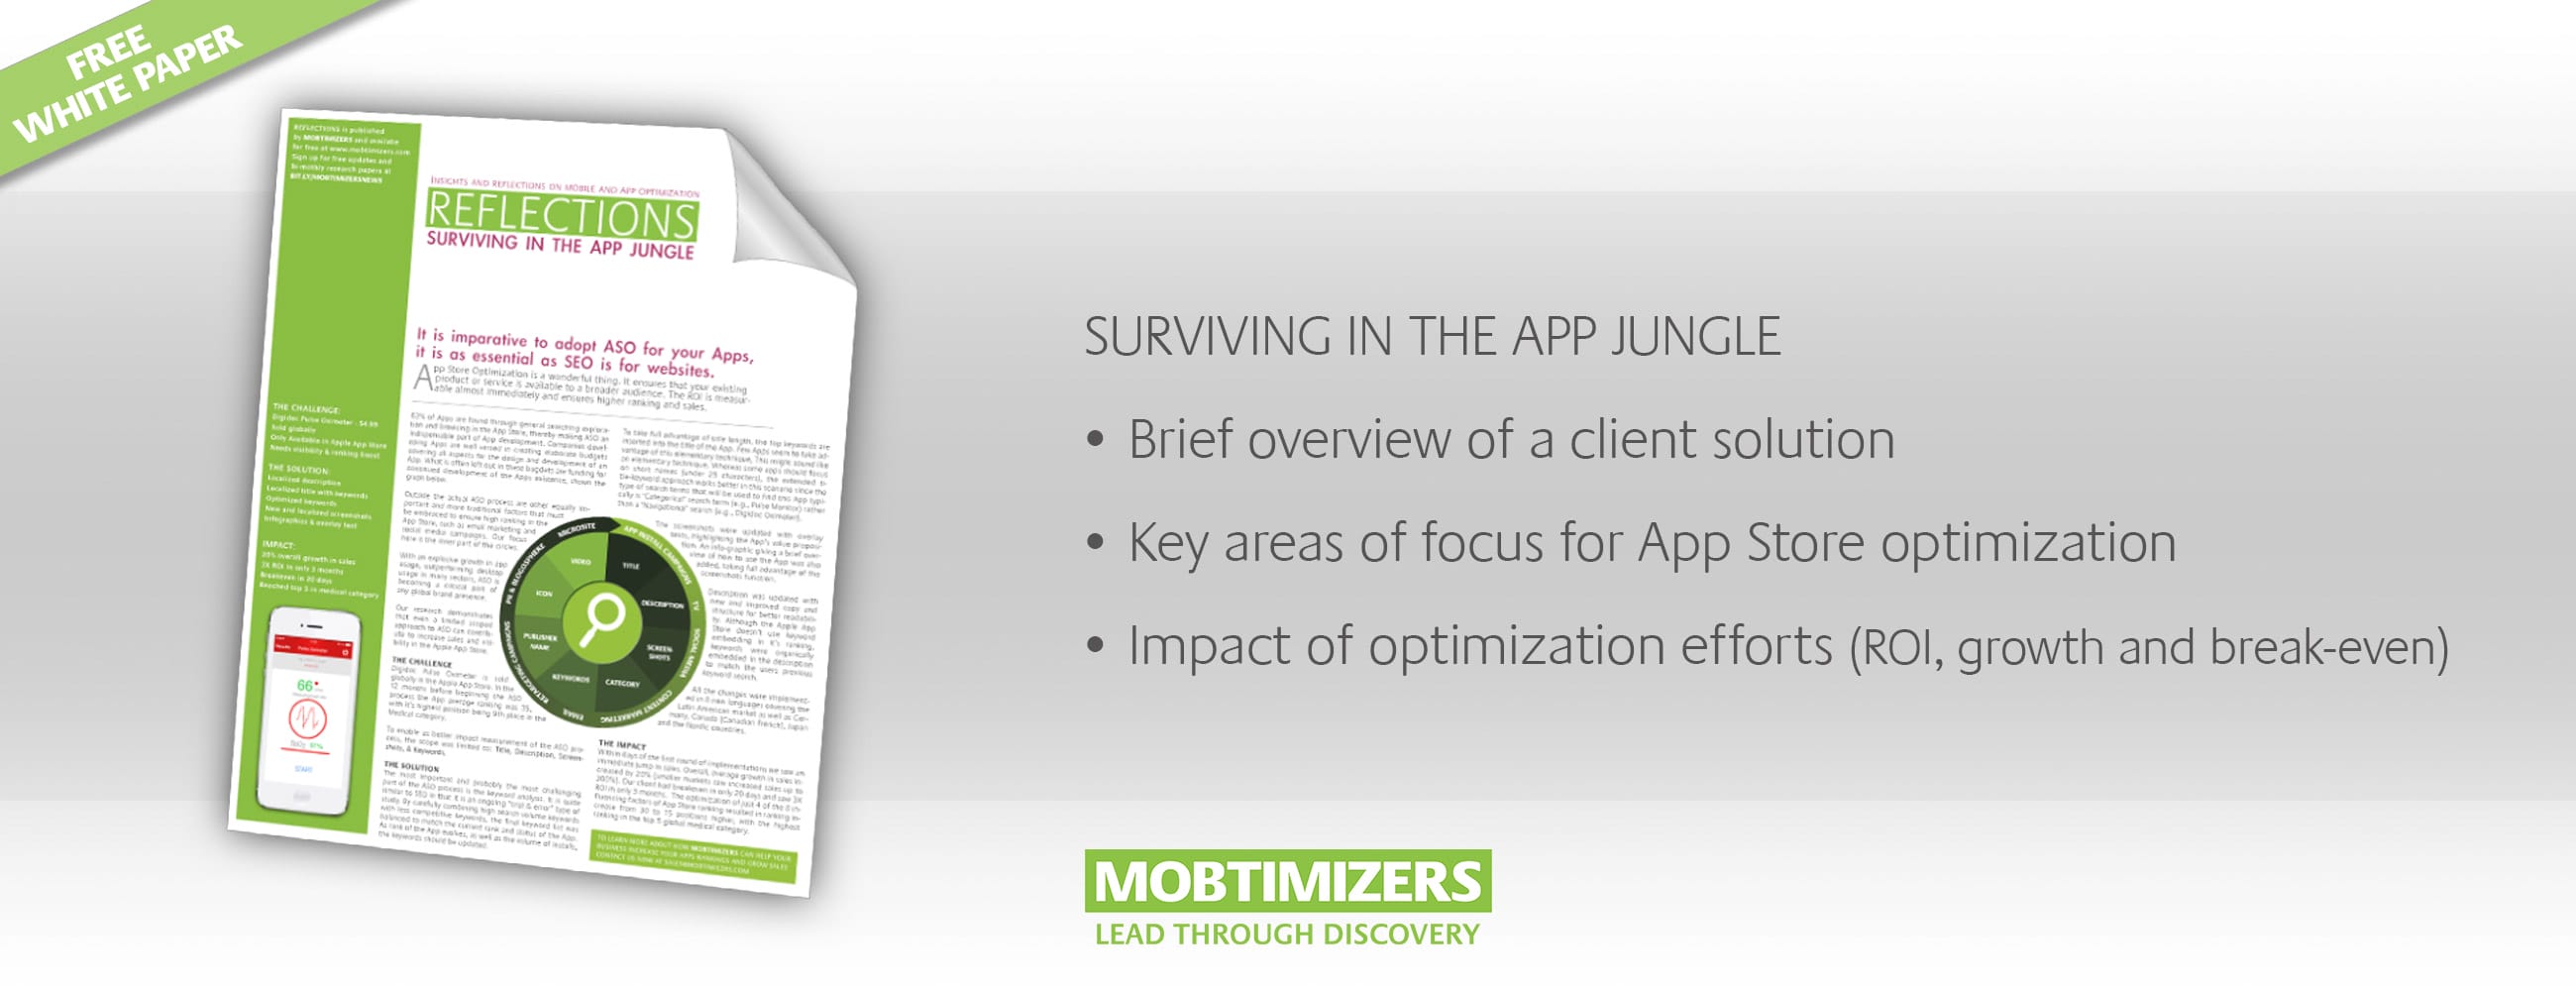 Graphic for downloading white paper: App Store Optimization Study